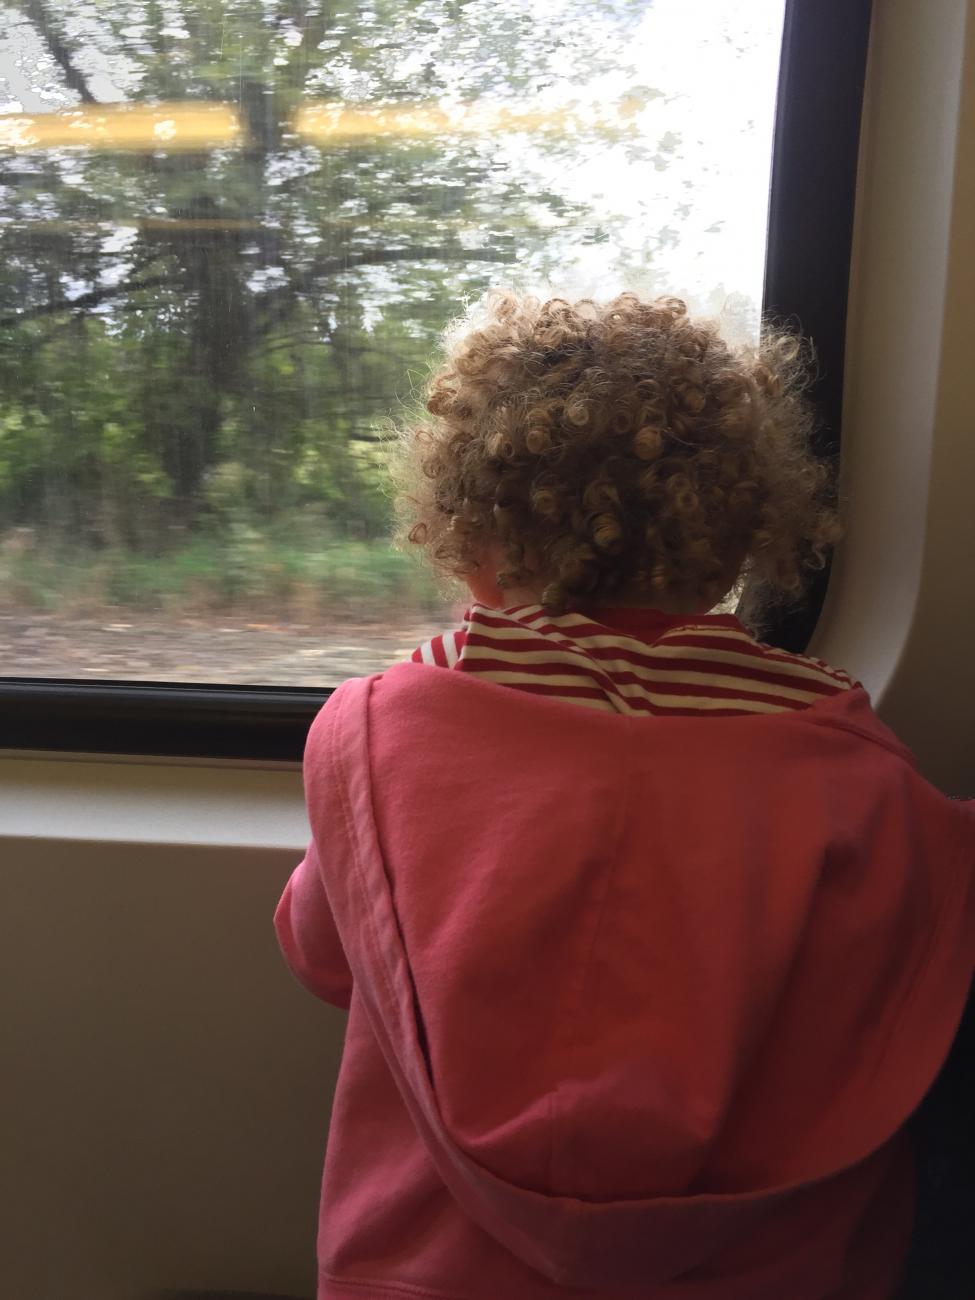 A young child wearing a pink jacket looks out the window of a Sounder train.